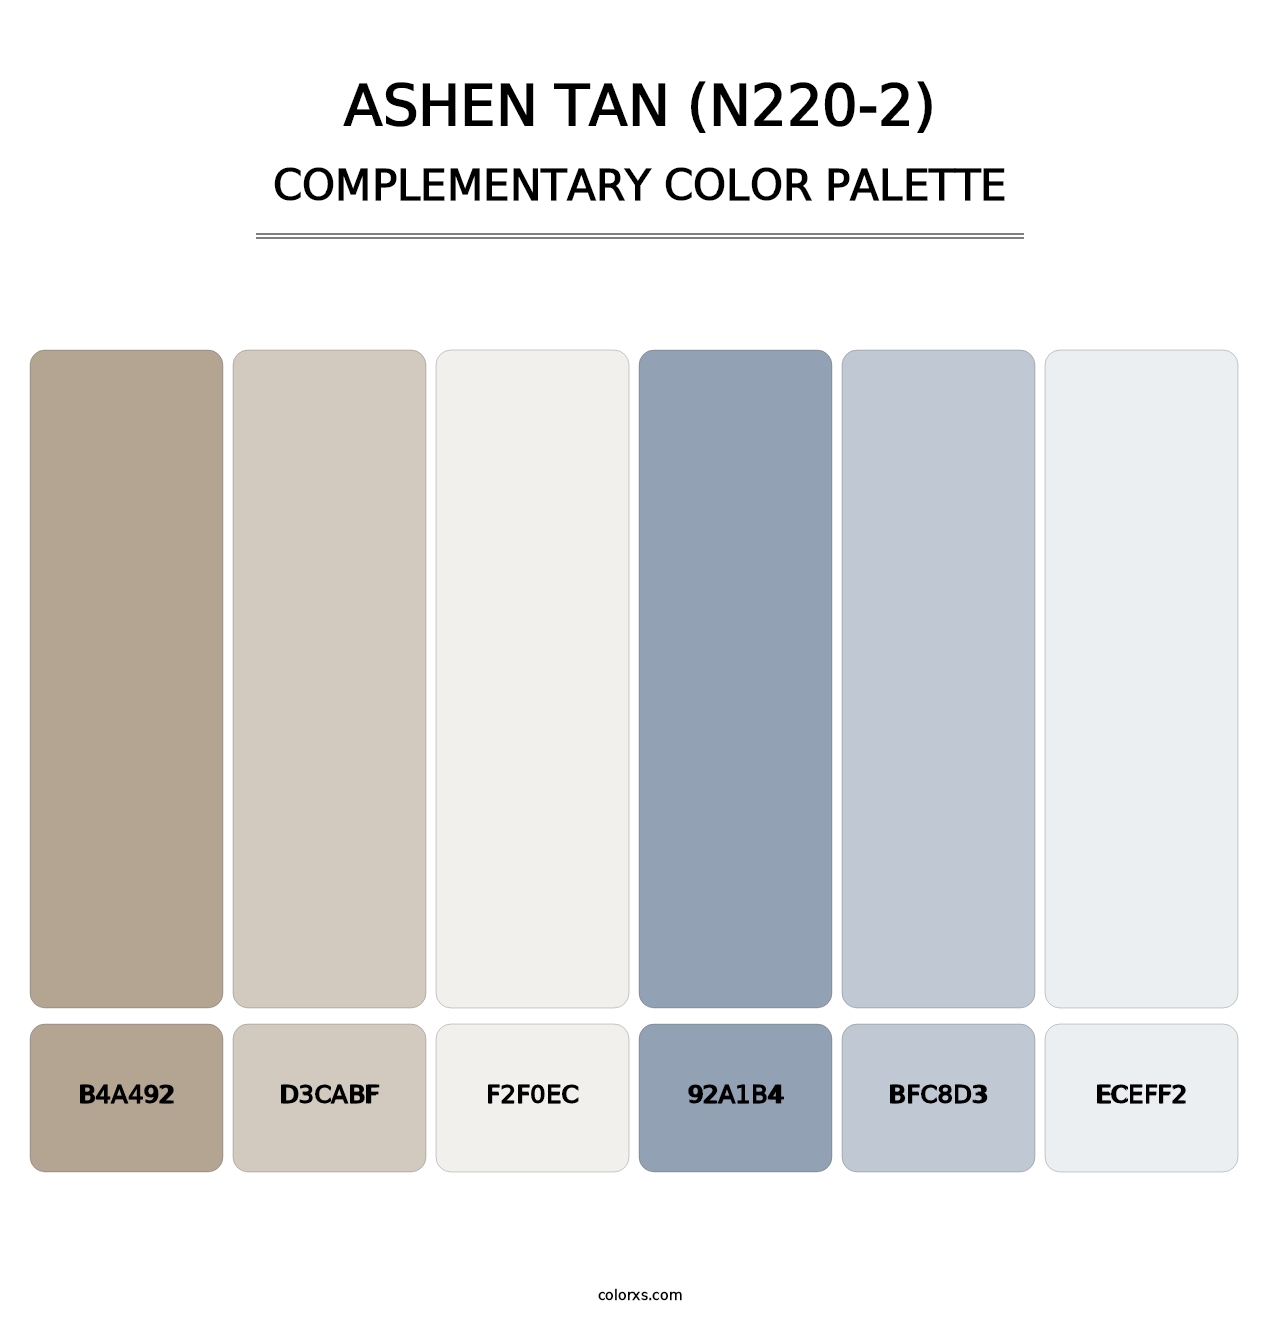 Ashen Tan (N220-2) - Complementary Color Palette